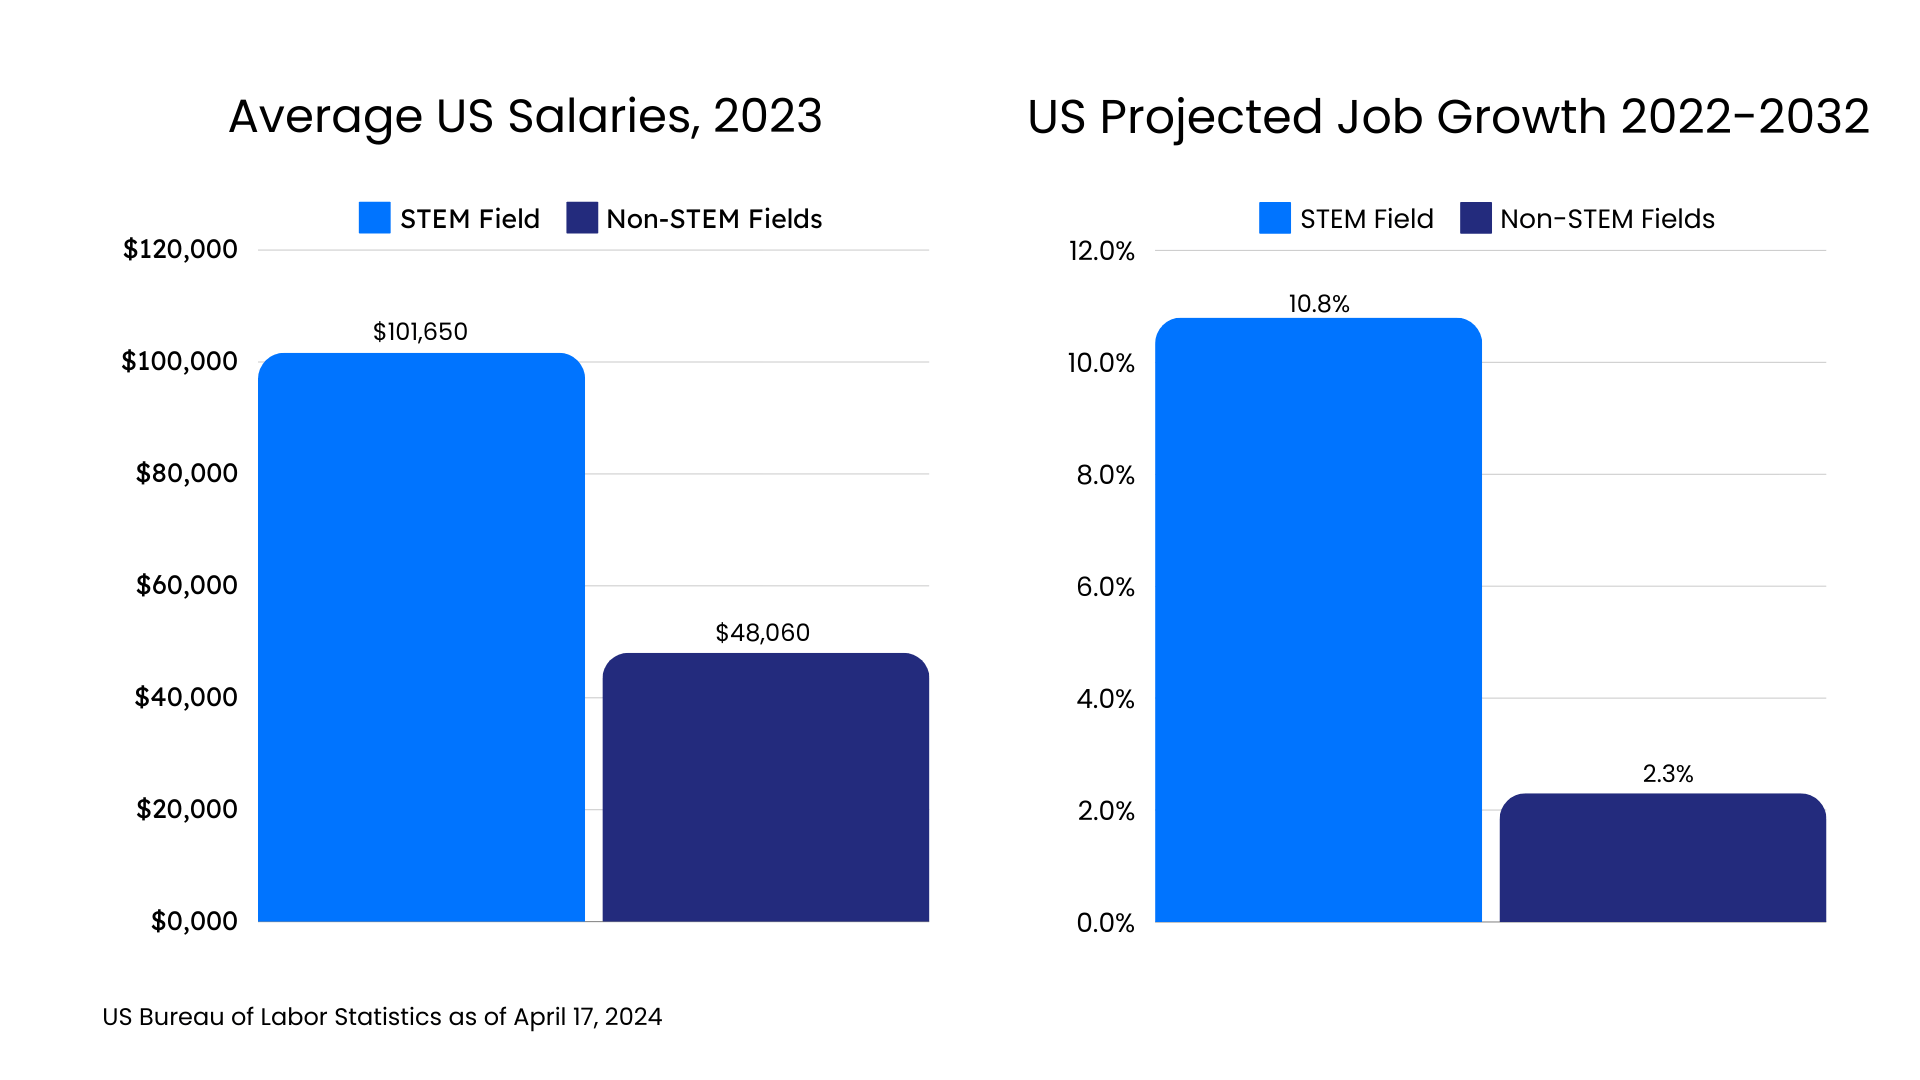 Graph of Average US Salaries, 2023 and US Projected Job Growth 2022-2032.